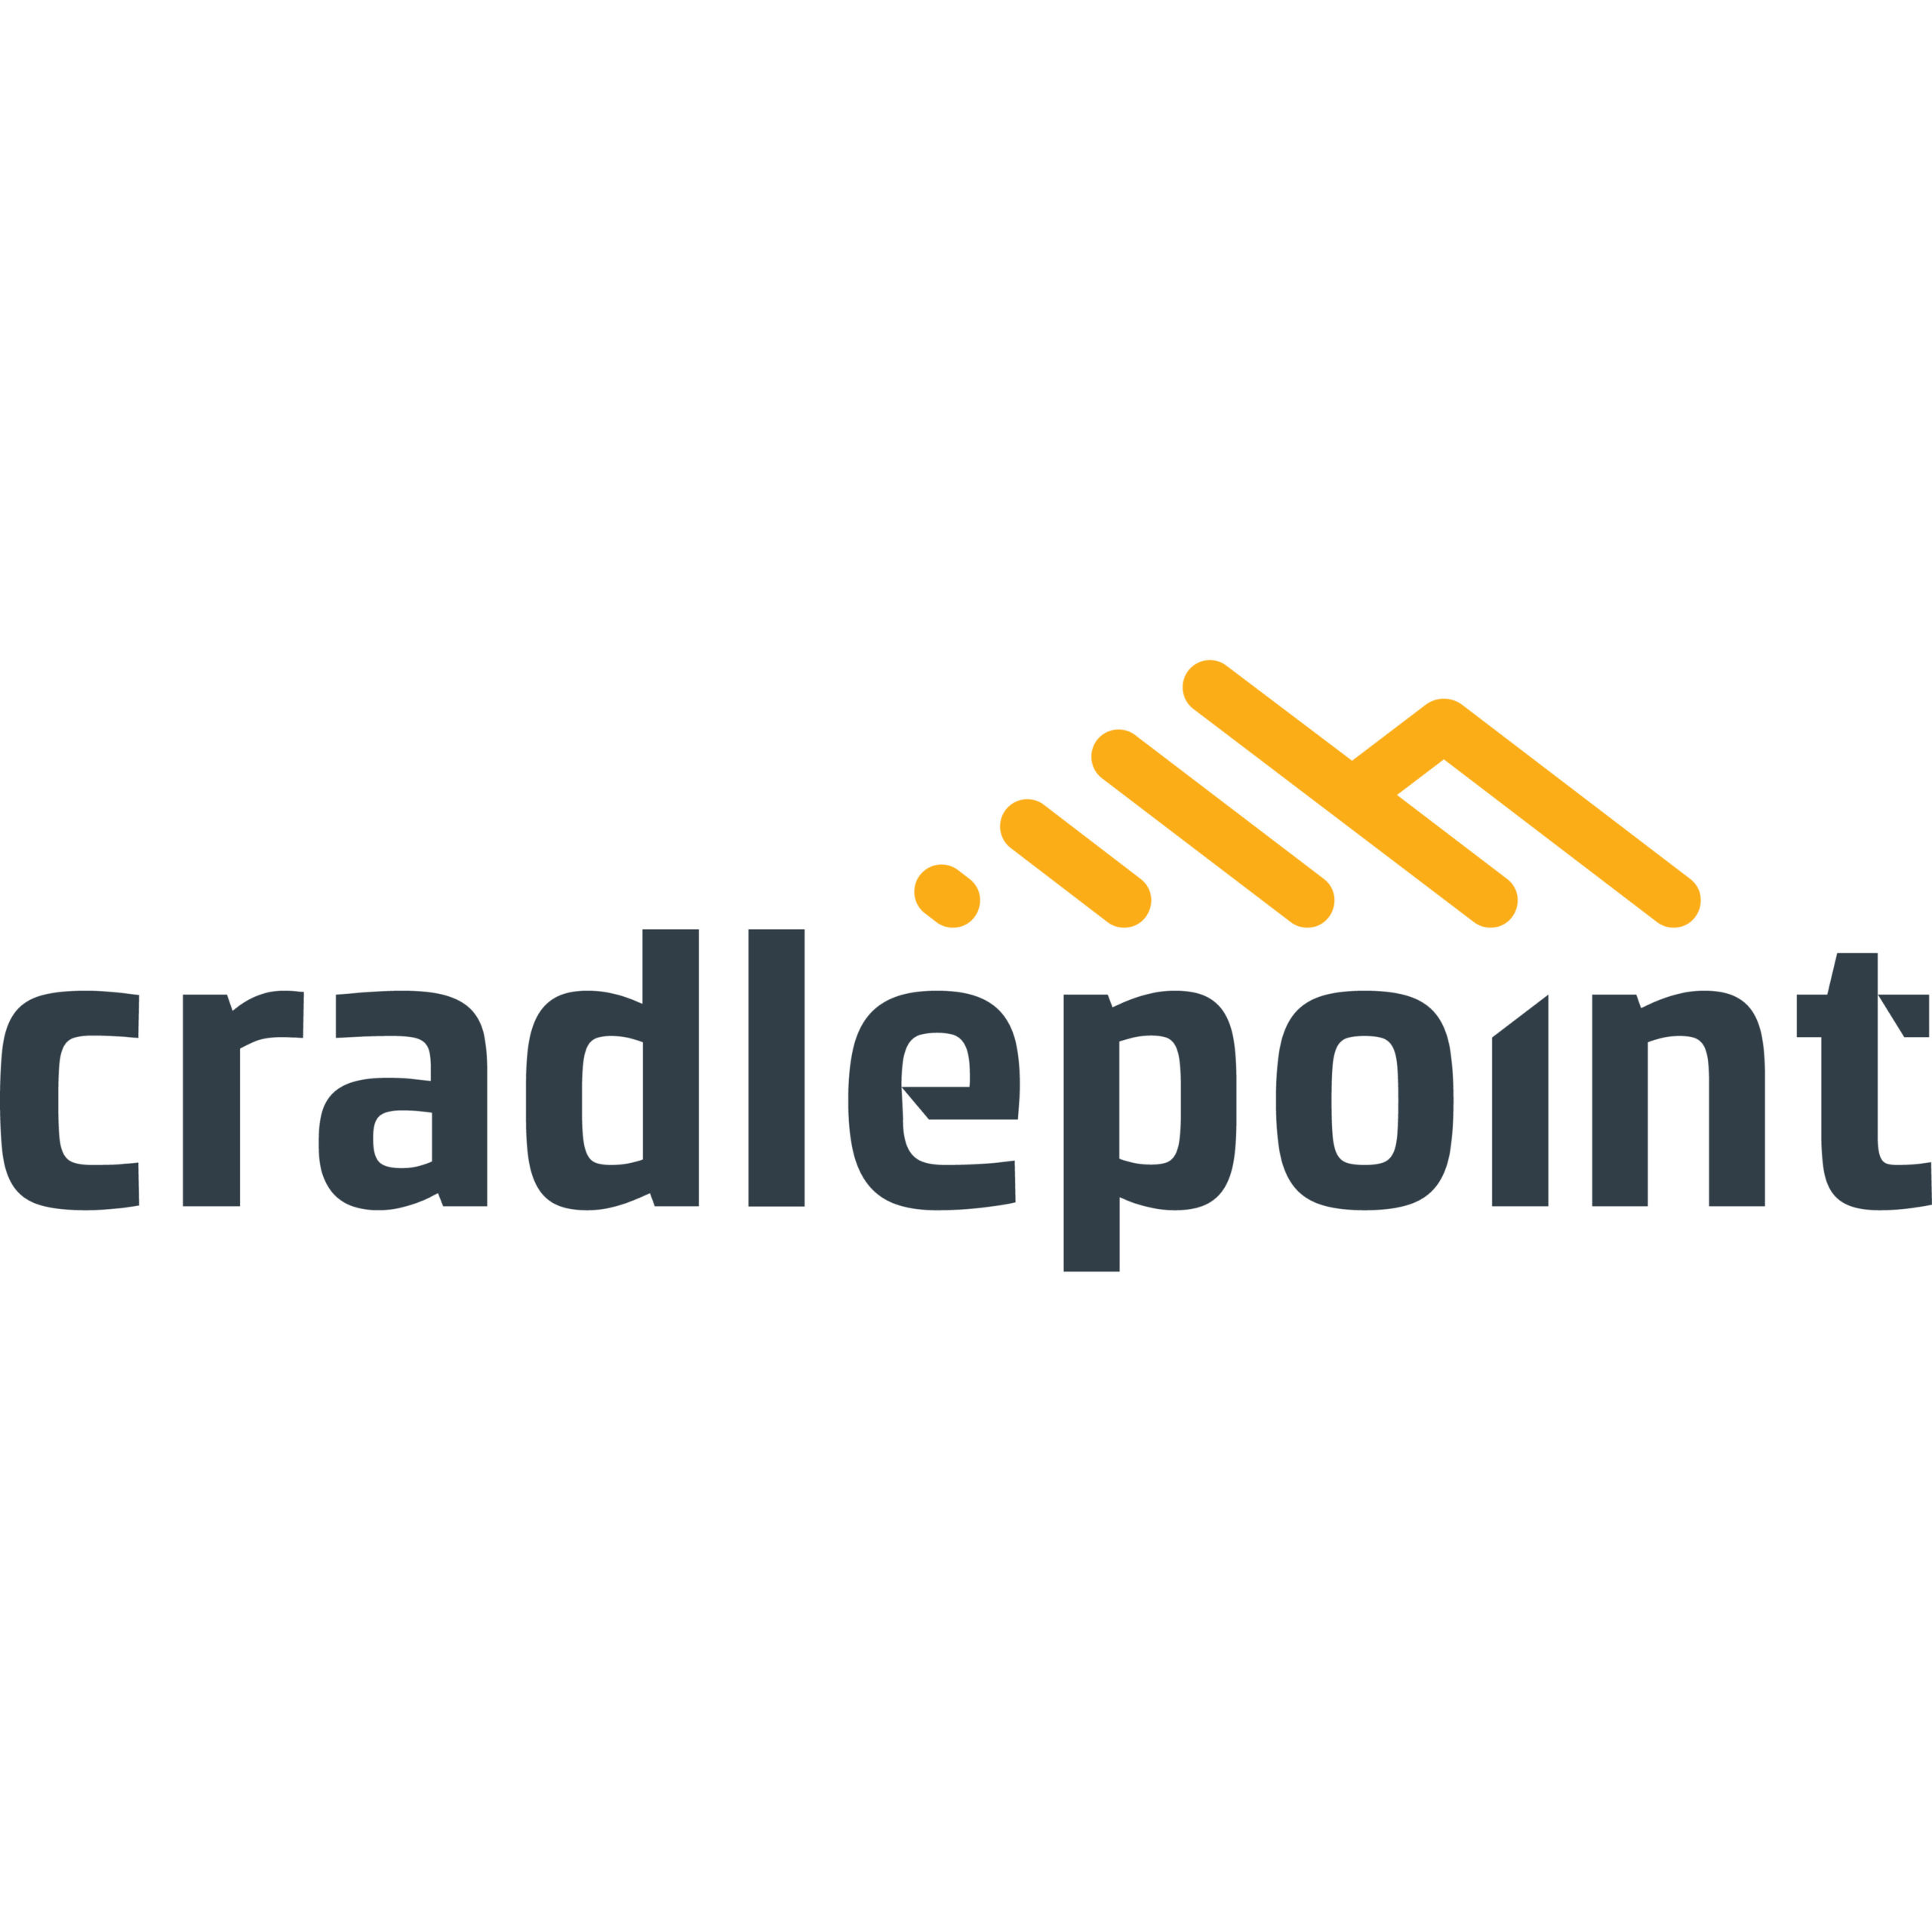 CradlePoint NetCloud Branch 5G Adapter Essentials Plan and Advanced PlanSubscription License 1 License BEA5-NCEA-R